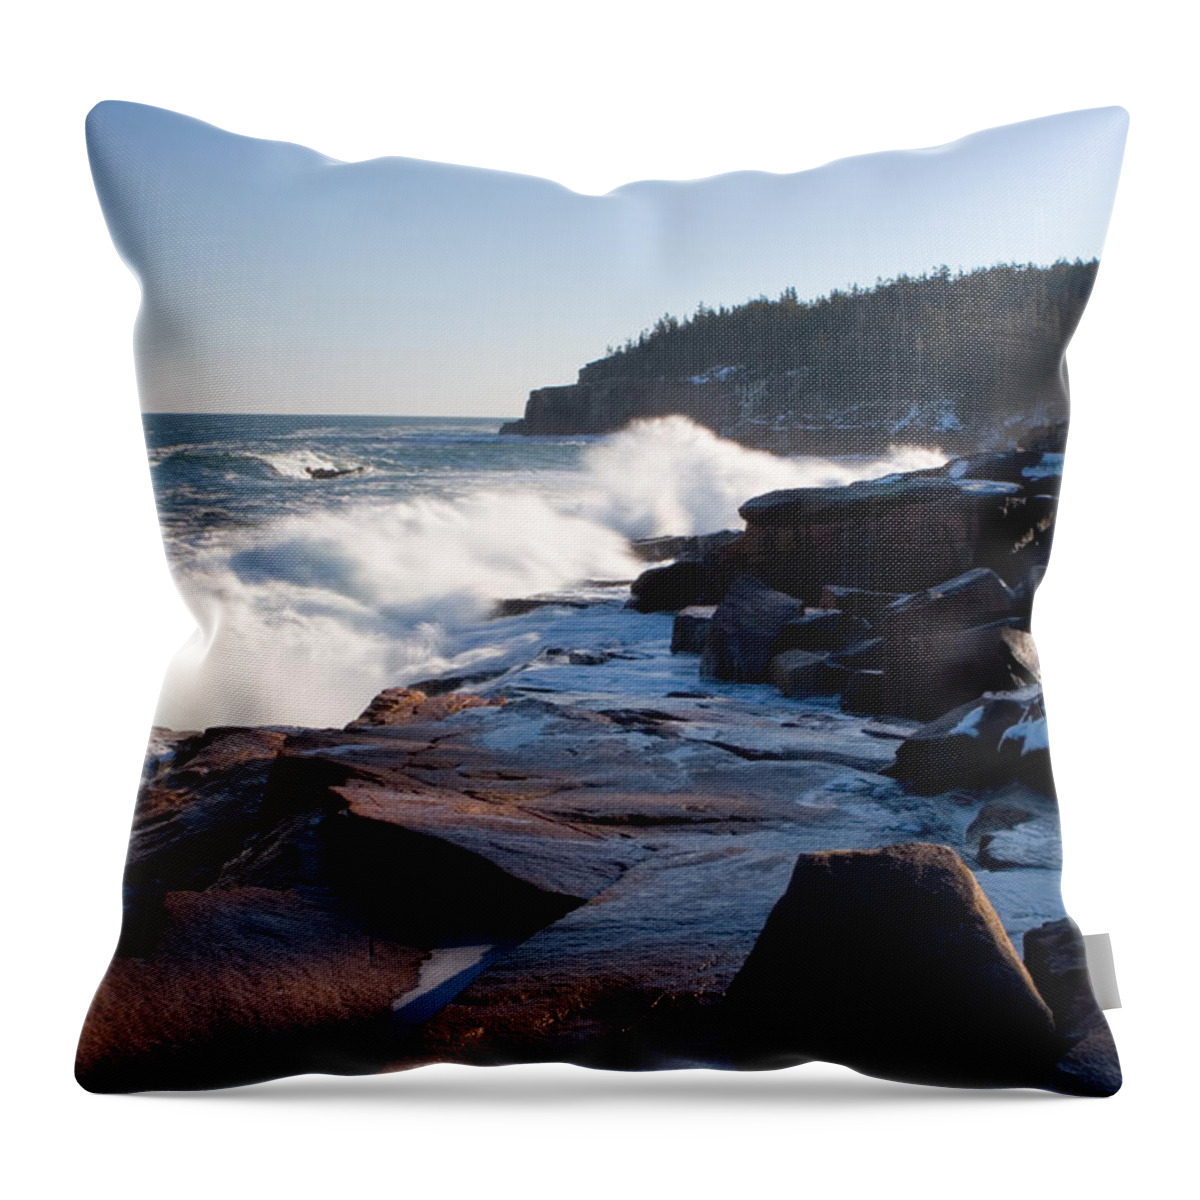 Landscape Throw Pillow featuring the photograph Acadia Coast overlooking Otter Point 9422 by Brent L Ander